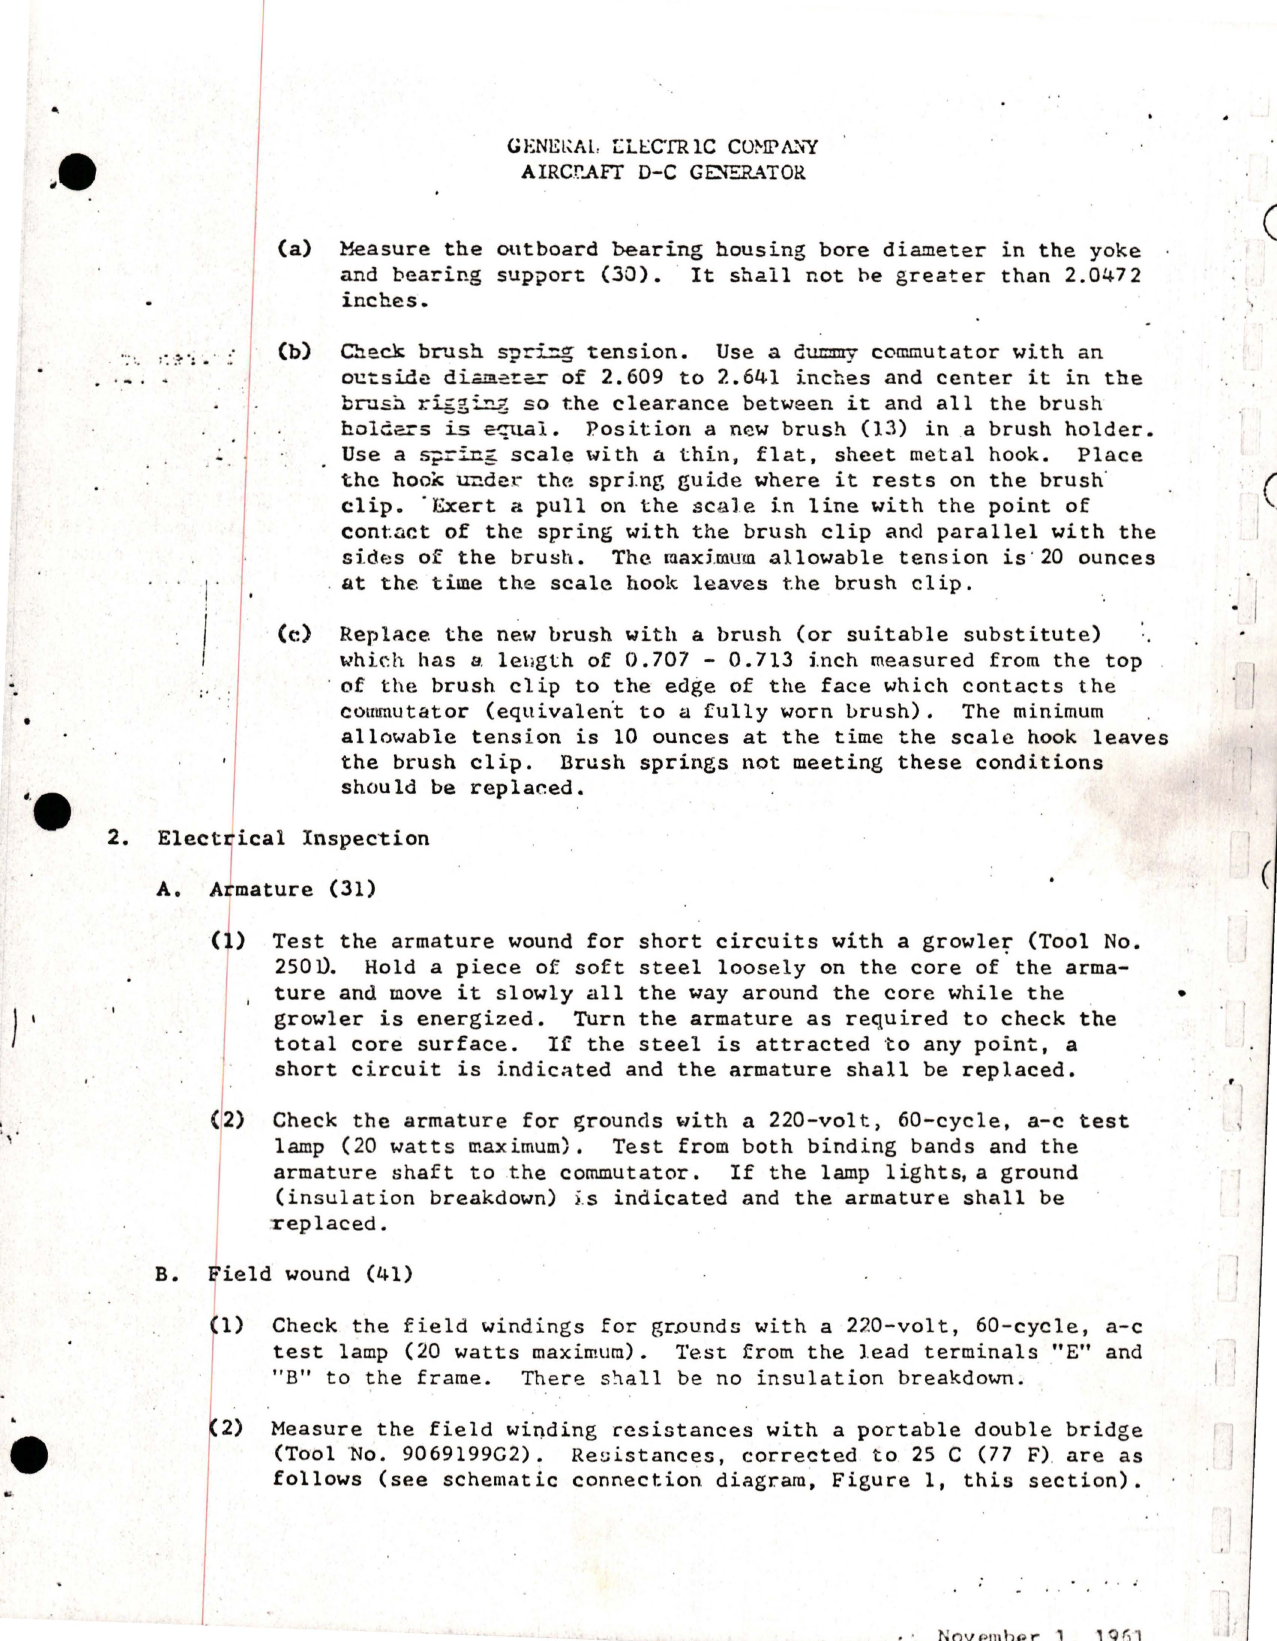 Sample page 9 from AirCorps Library document: Overhaul Instructions with Parts Breakdown for Aircraft DC Generator - Model 2CM63C8